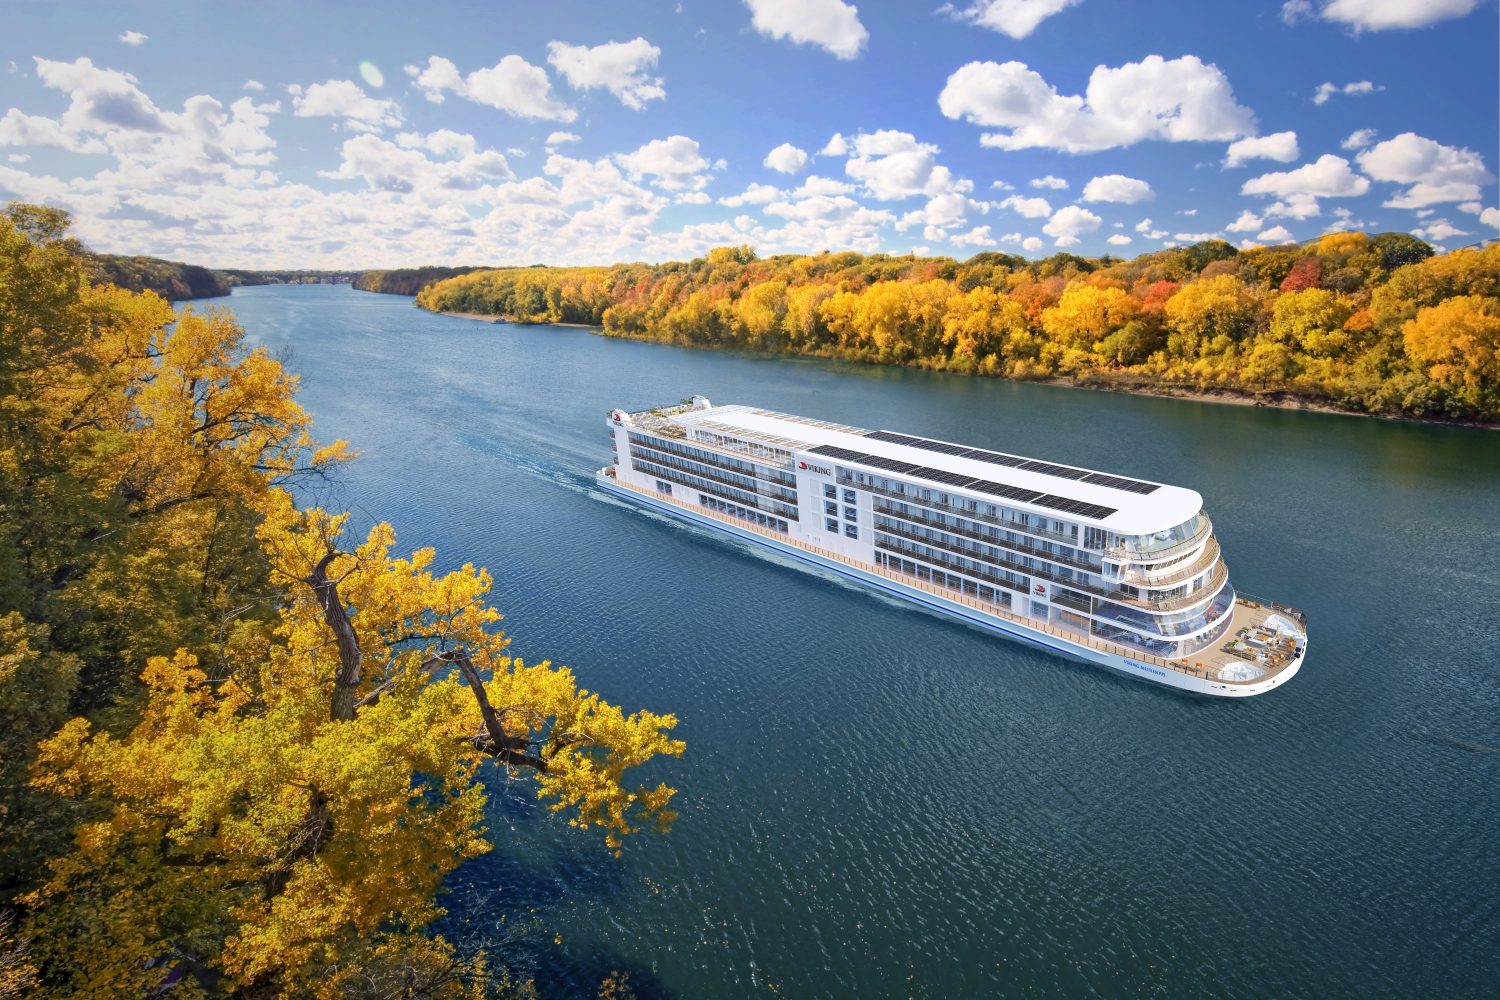 First Look at Viking's New Cruise Ship for the Mississippi River